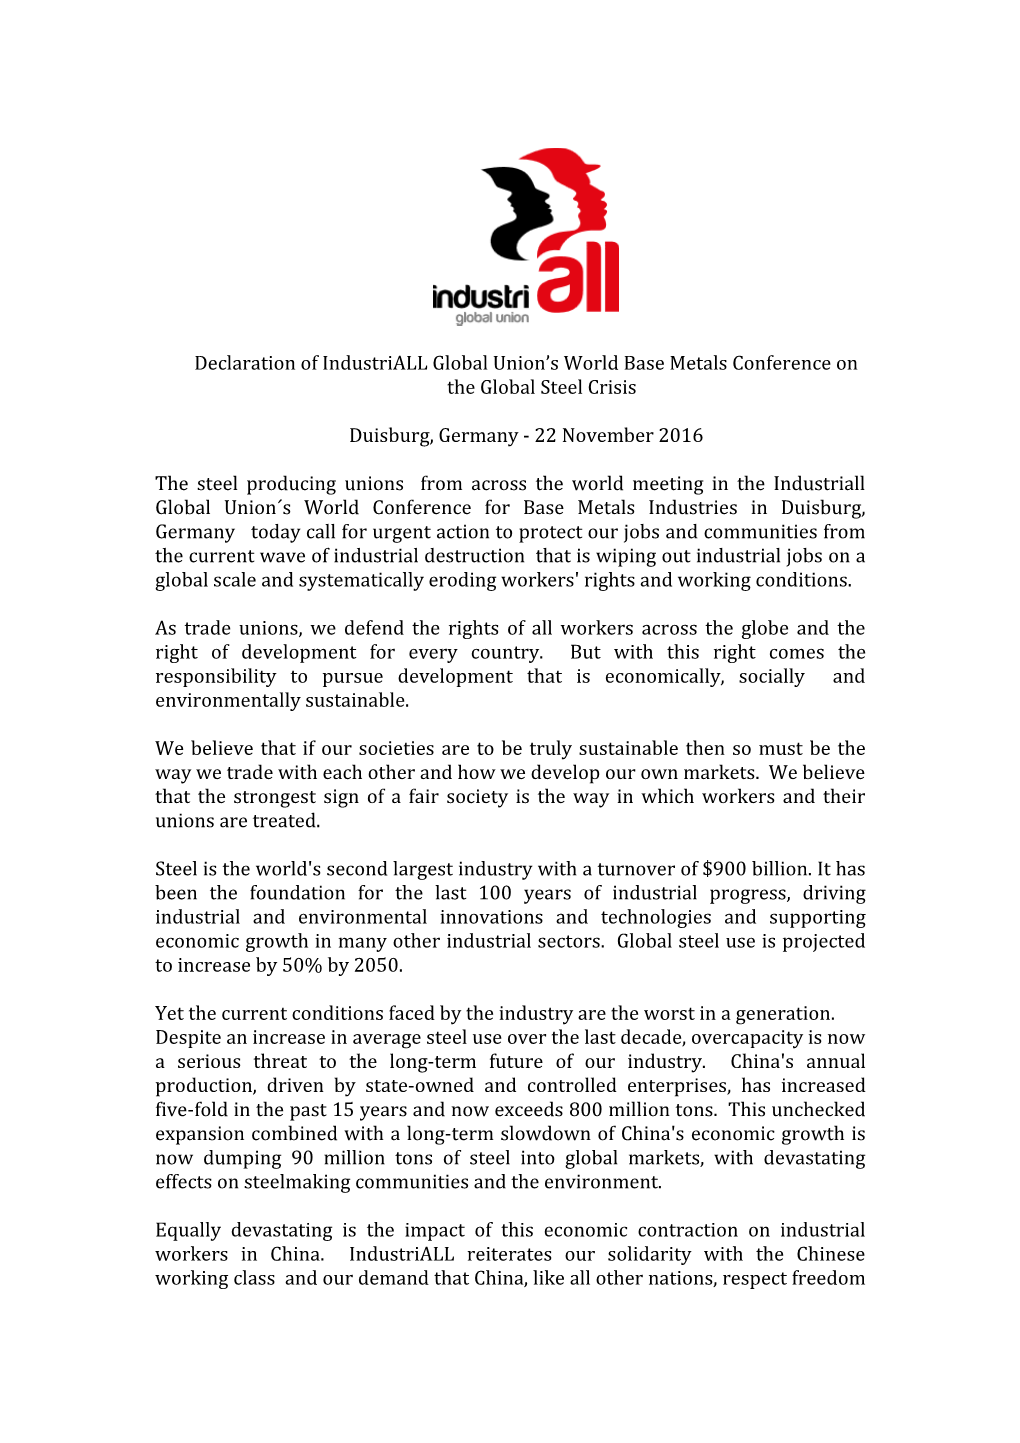 Declaration of Industriall Global Union S World Base Metals Conference on the Global Steel